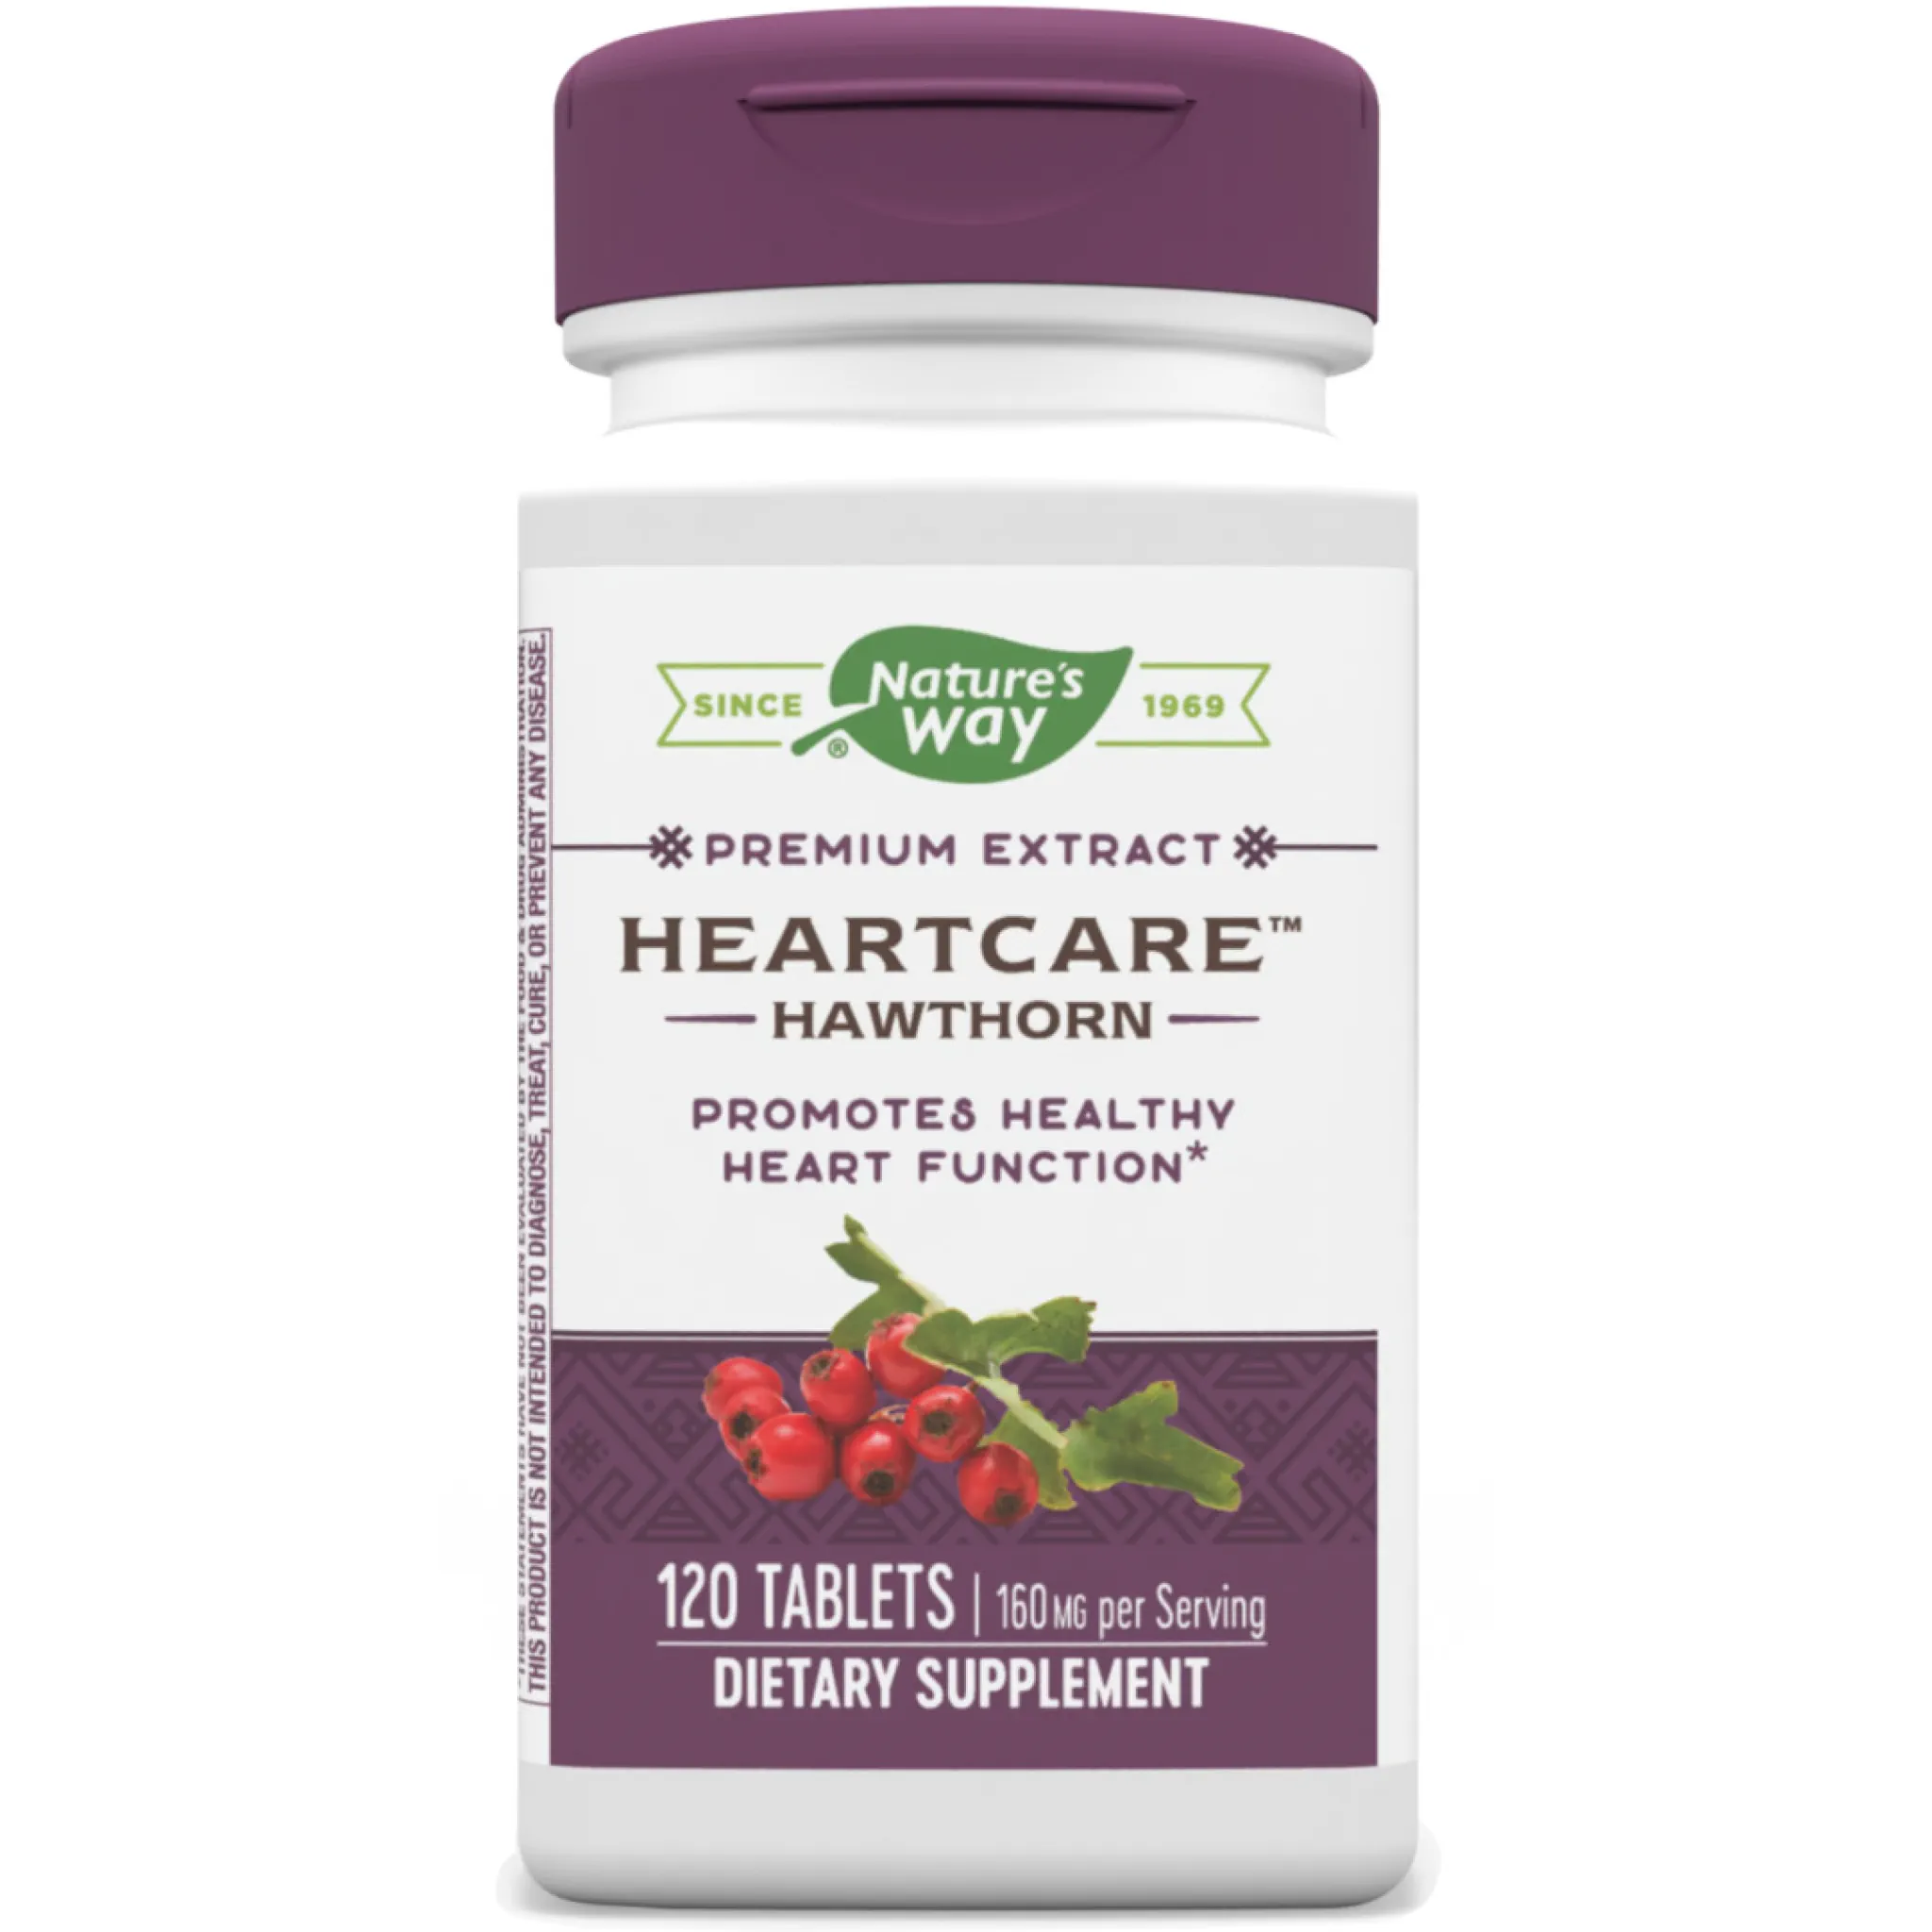 Natures Way - Heart Care